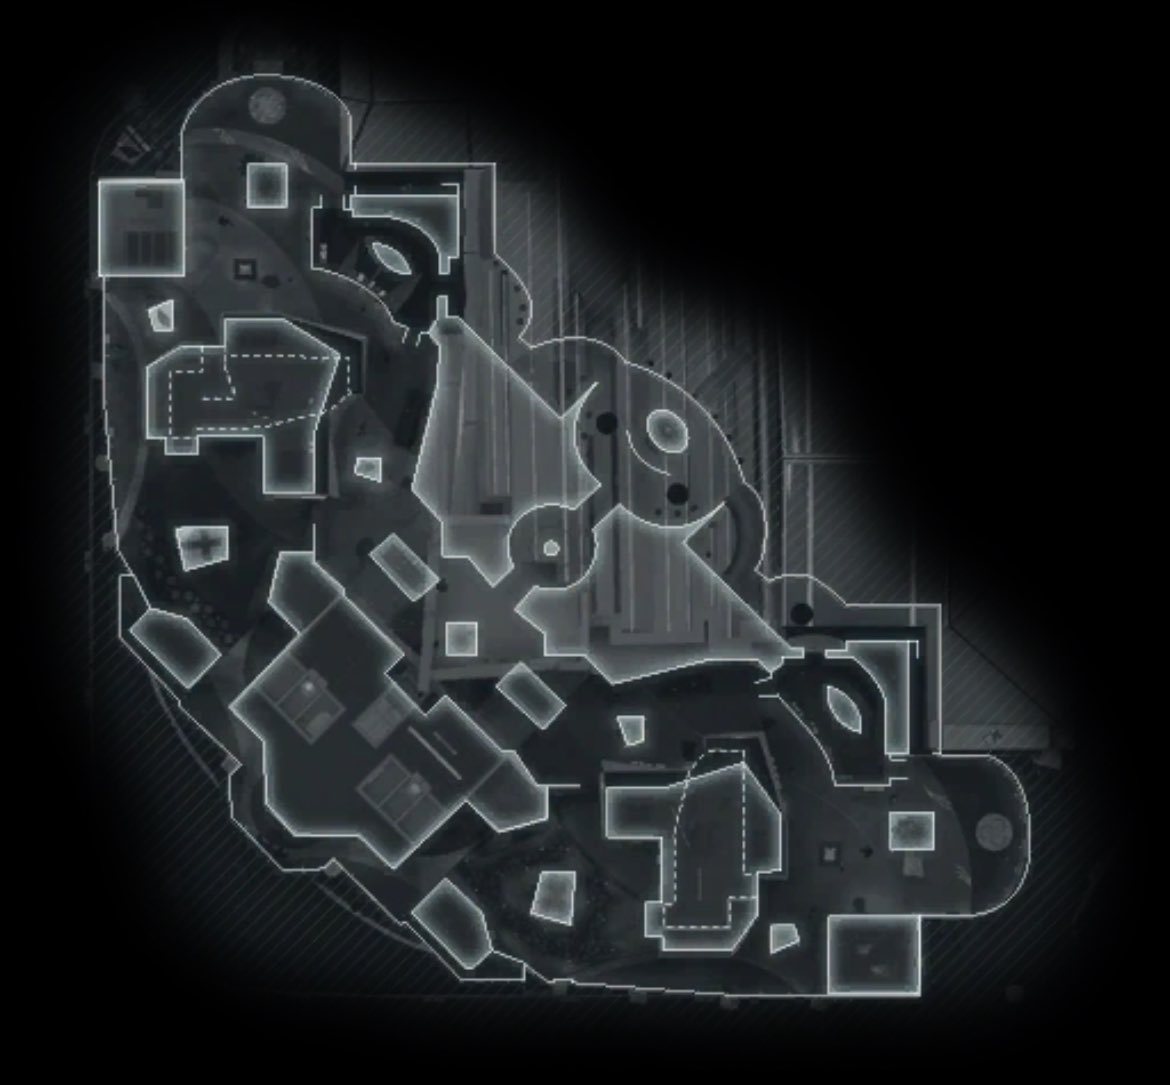 Guess this map